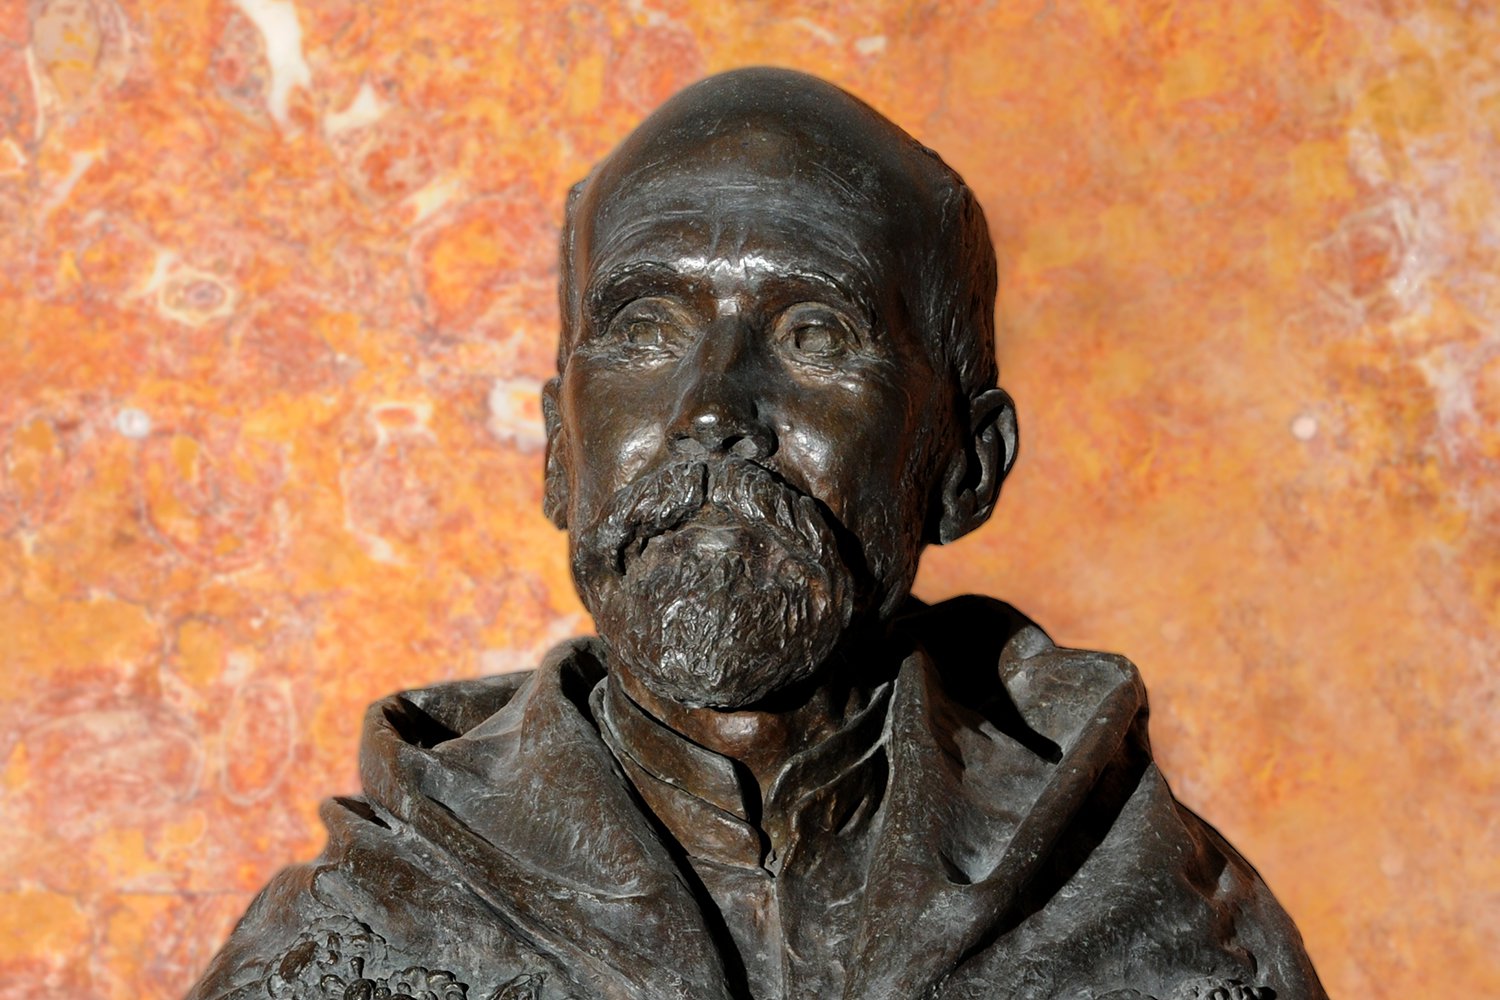 Bust of Gomes Teixeira on the Rectory's interior steps